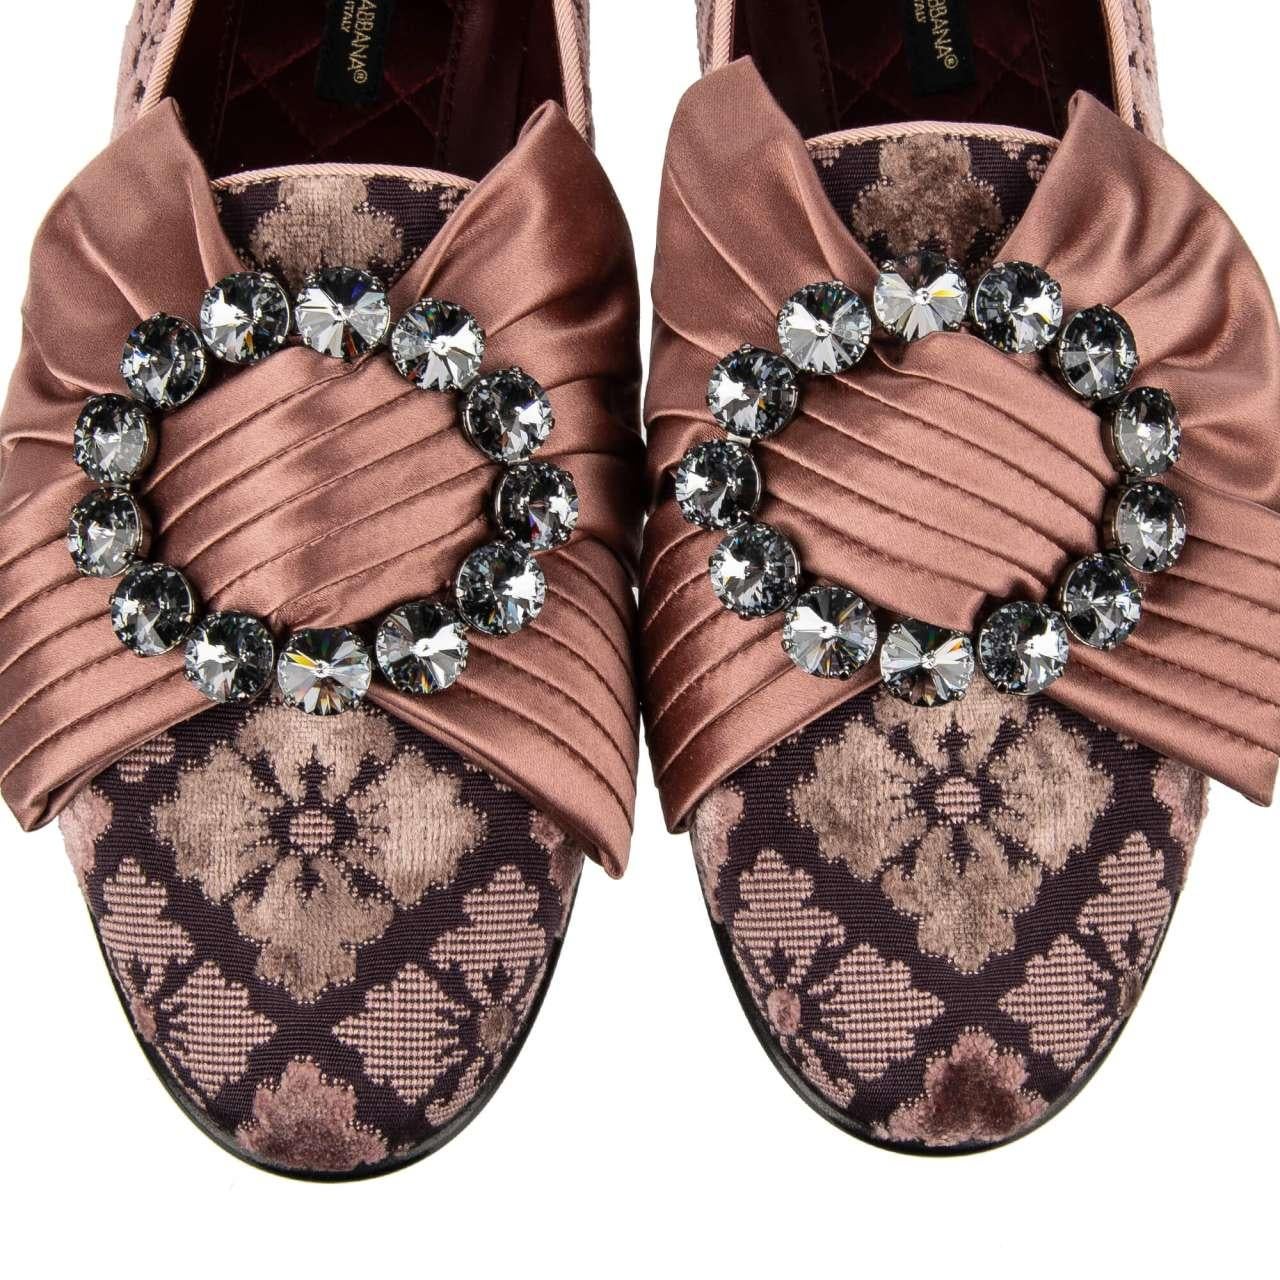 - Jacquard Ballet Flats Shoes YOUNG QUEEN in pink with Crystals Ribbon Brooch by DOLCE & GABBANA - New with Box - MADE IN ITALY - Large Ribbon Brooch in front - Model: CP0140-AJ336-8G433 - Material: Jacquard , 95% Viscose, 5% Silk - Inner Material: